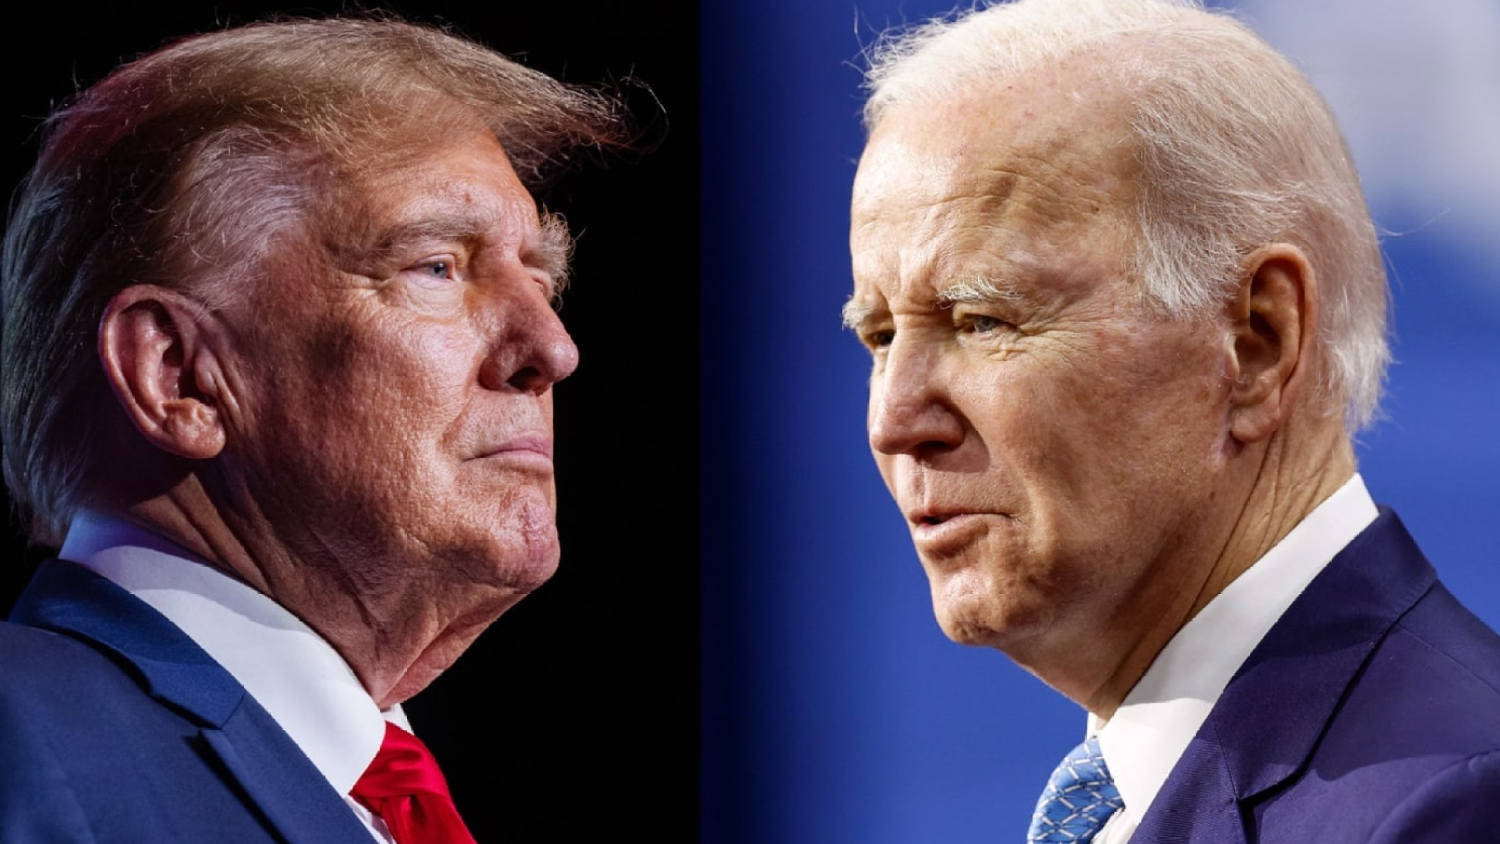 Biden campaign will try to show voters Trump is 'much worse' in the event of a guilty verdict